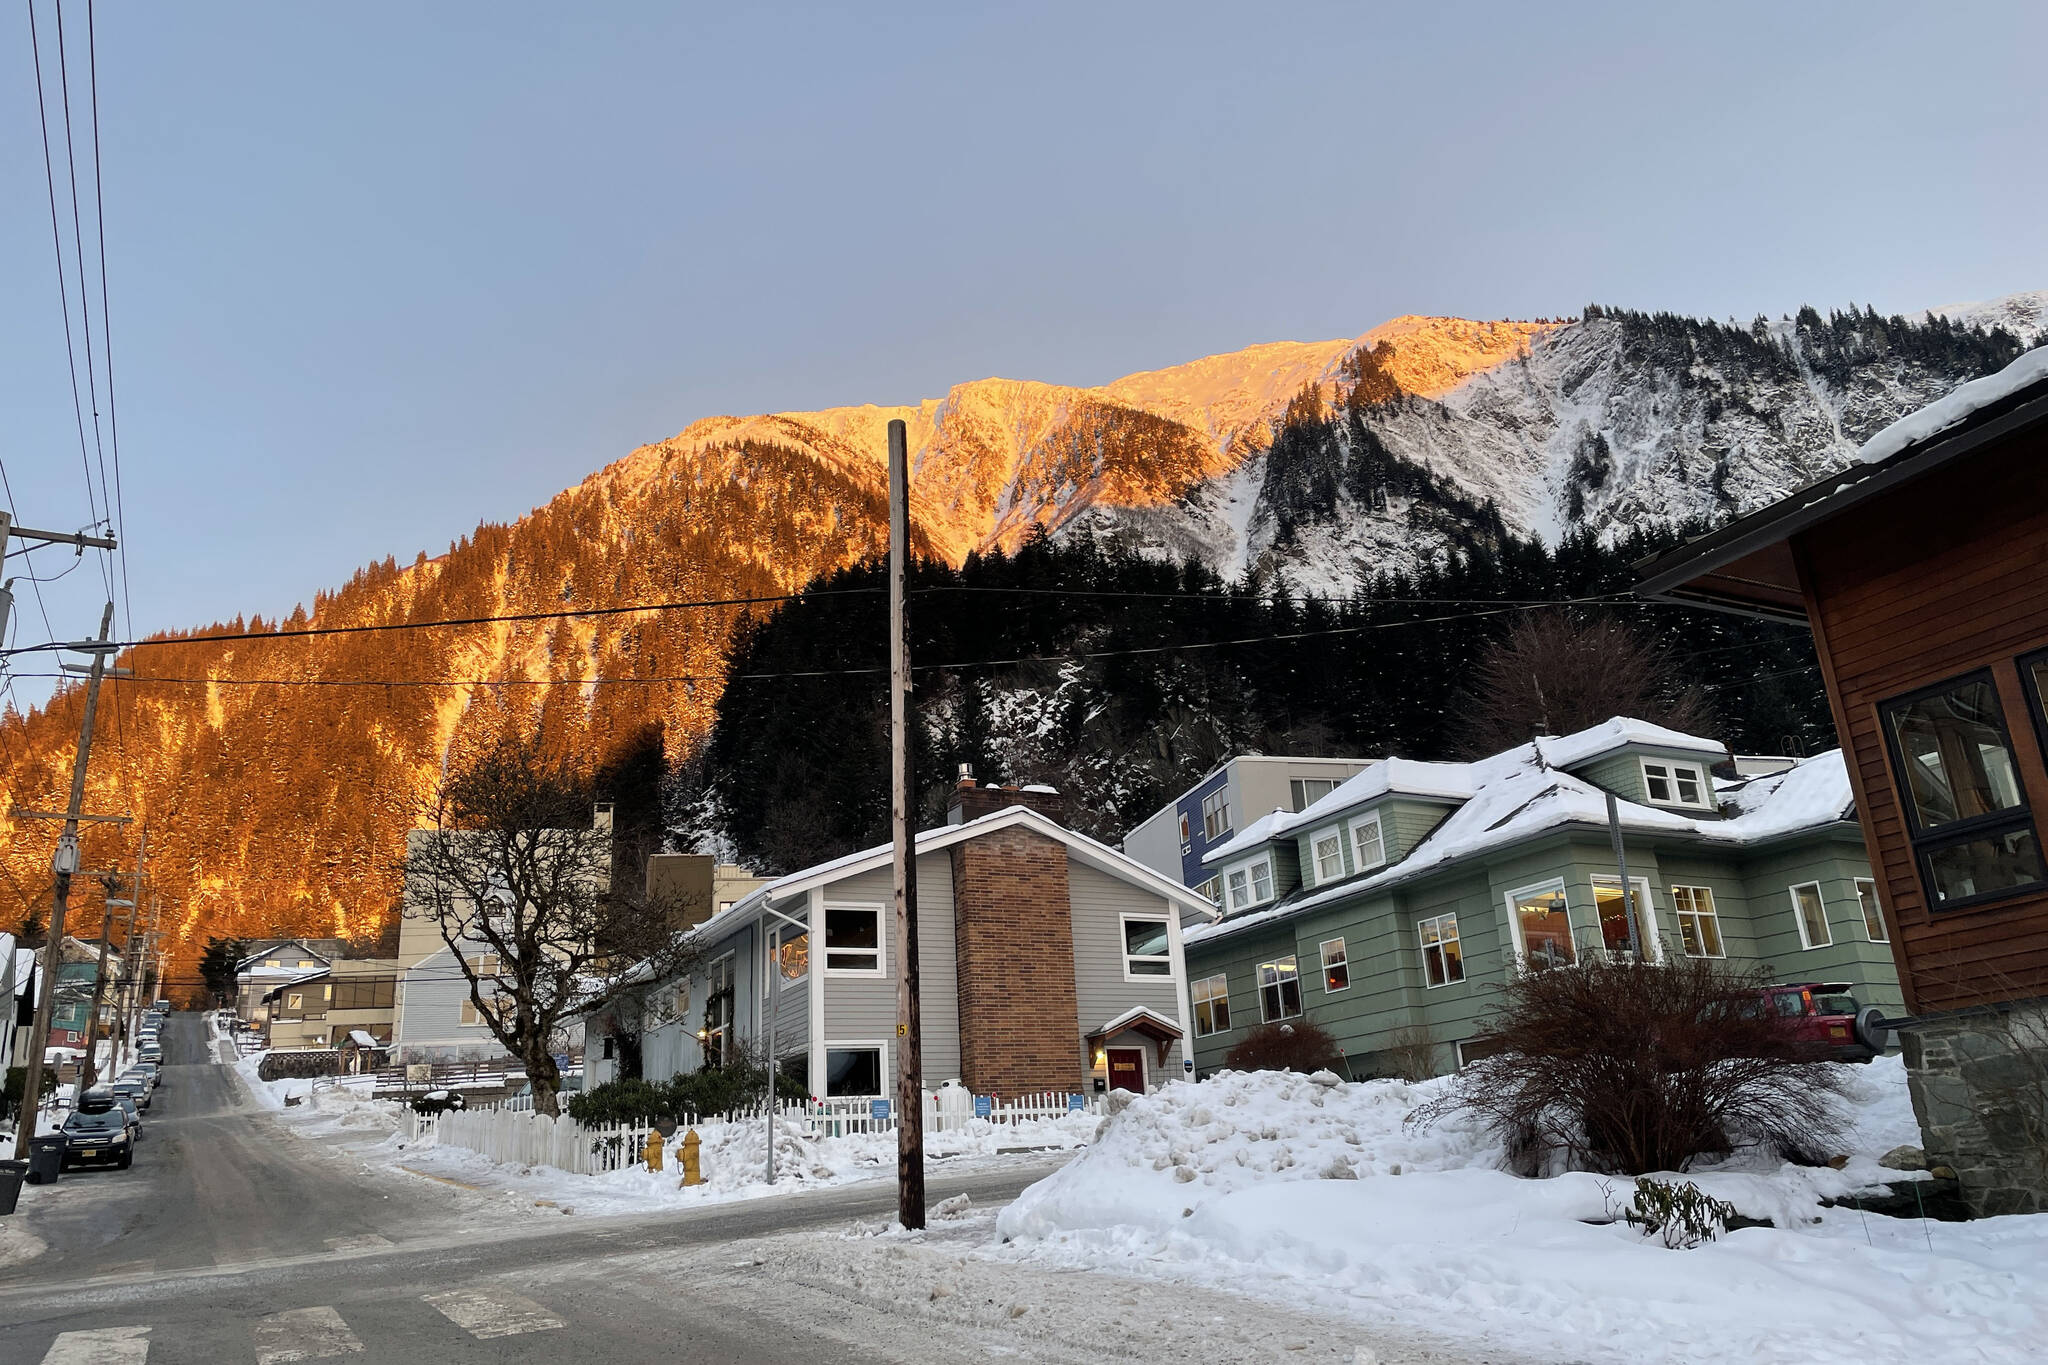 The sun rises over Juneau on Dec. 16, 2021. The solstice on Dec. 21 will mark the shortest day of the year as the northern hemisphere is at its furthest away from the sun. (Michael S. Lockett / Juneau Empire)